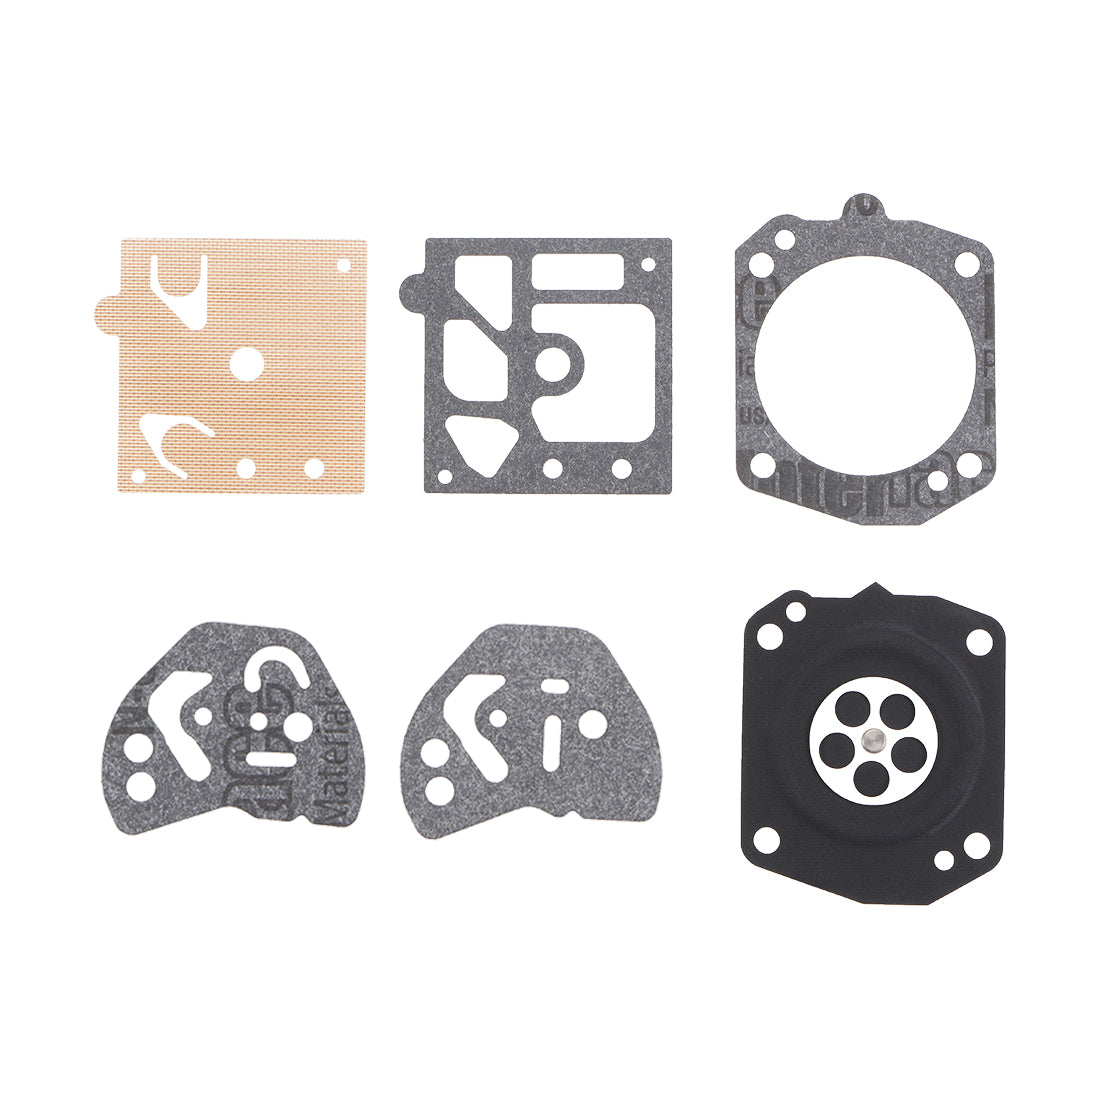 uxcell Uxcell Carburetor Rebuild Kit Gasket Diaphragm for CS510 for CS6701 Chainsaw Engines